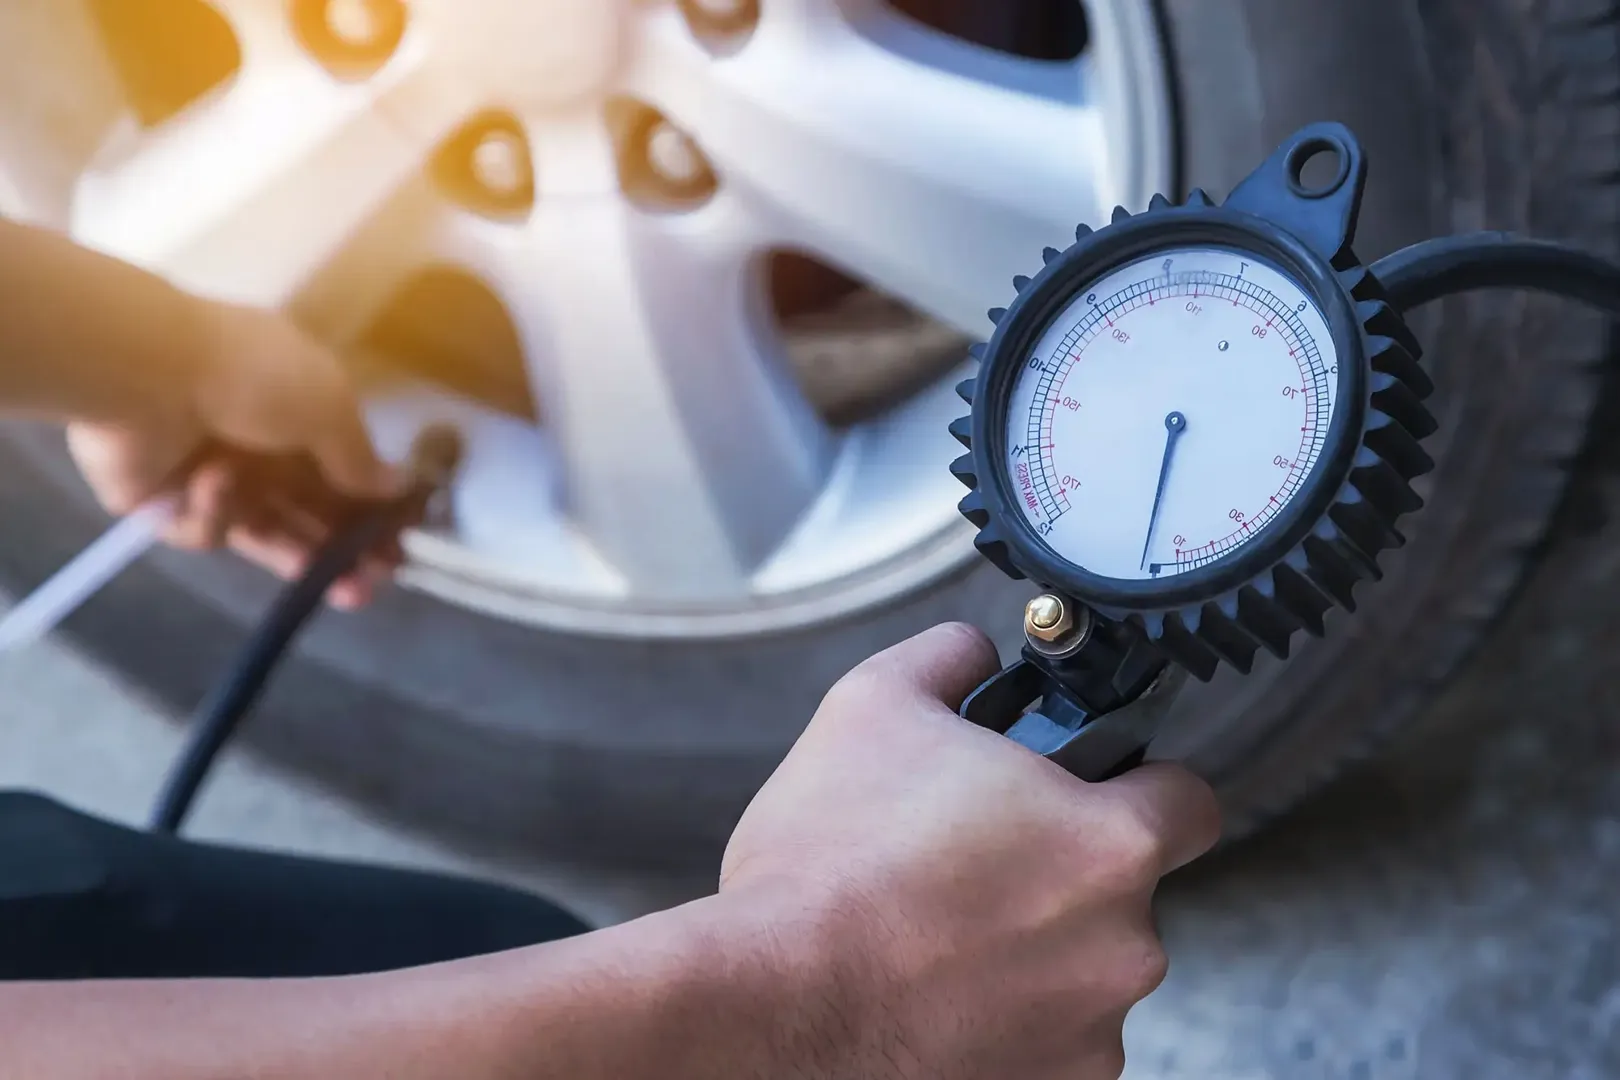 A person measuring tire pressure with a gauge.